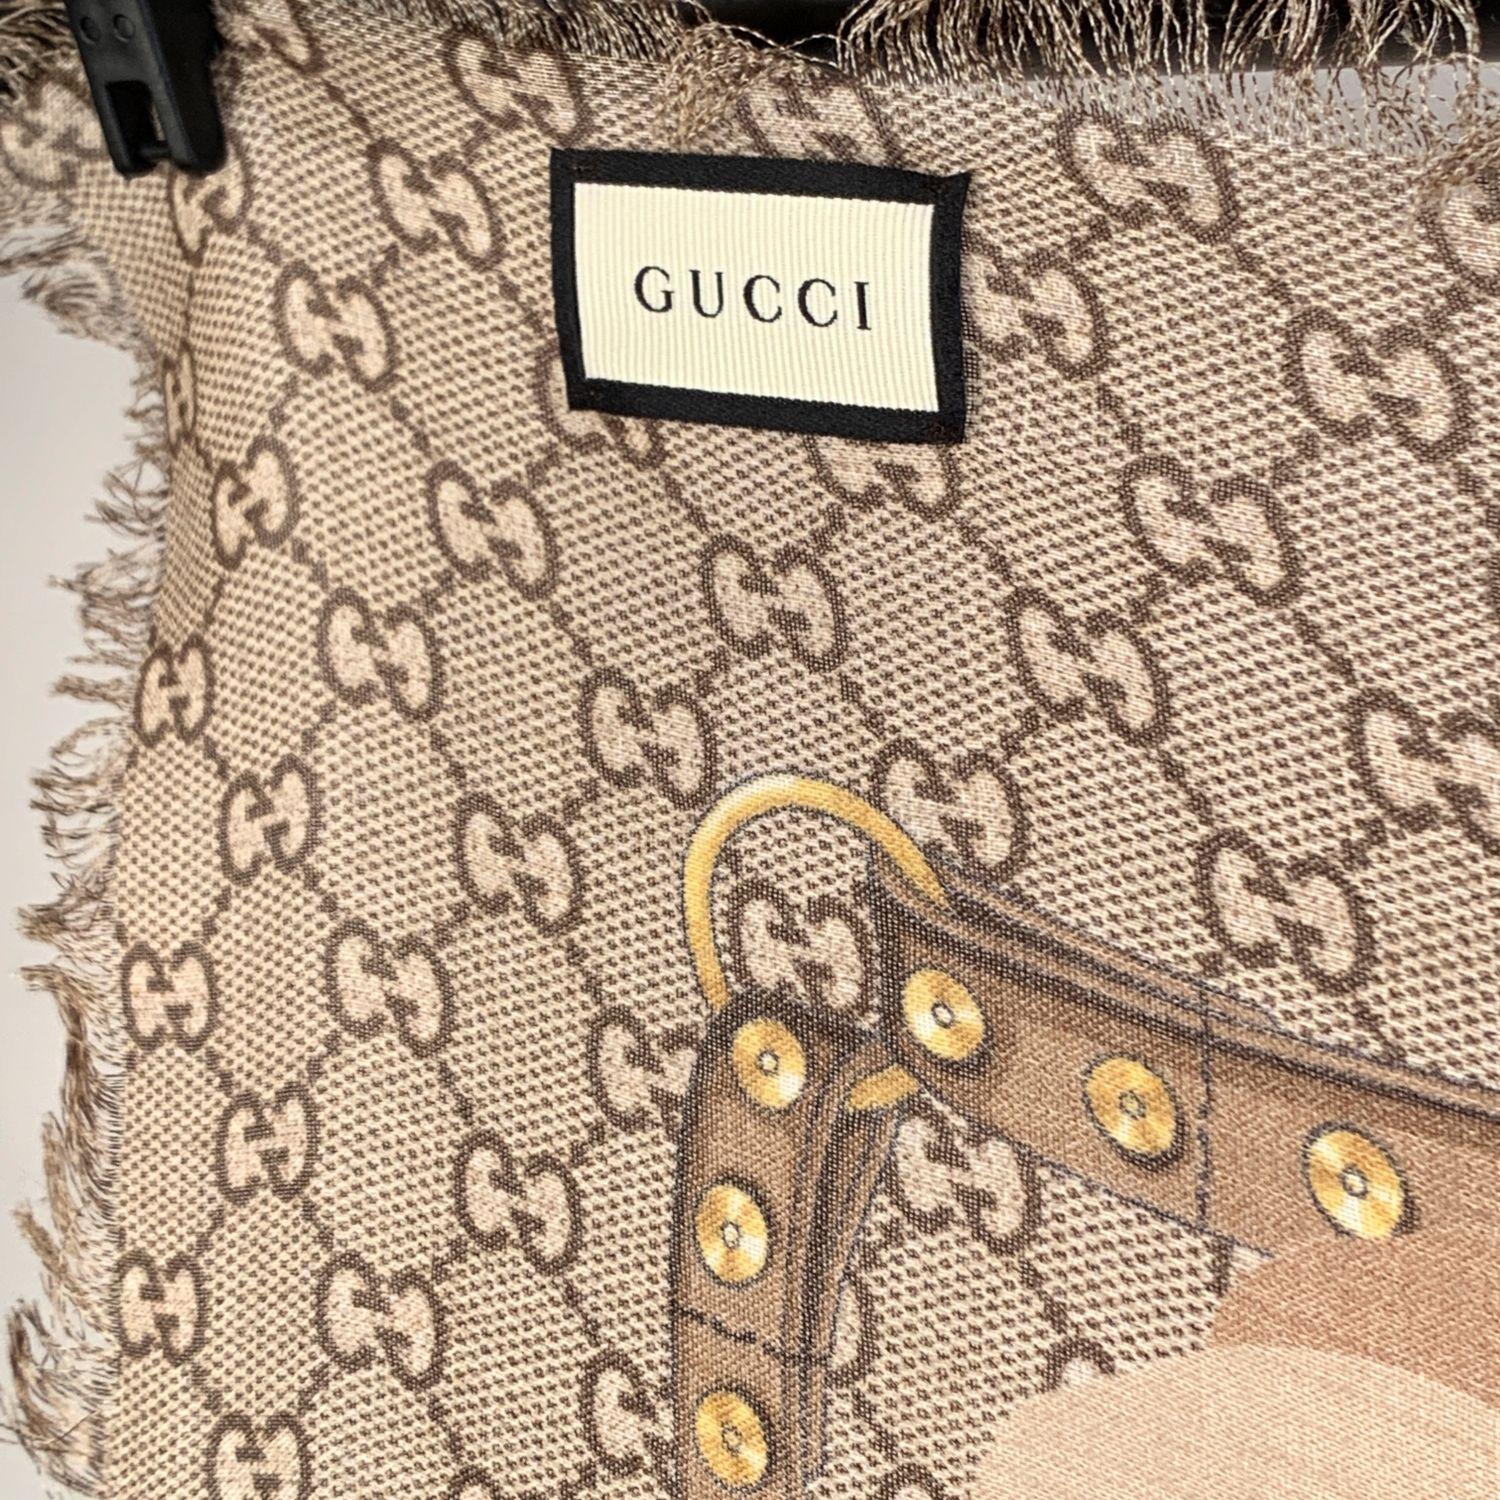 GUCCI large monogram shawl with beige GG monogram pattern with red Oshibana flowers horsebits, chains and belts printed all around the shawl. Frayed borders. 100% wool. GUCCI signature printed in a corner. Composition and care tags attached,